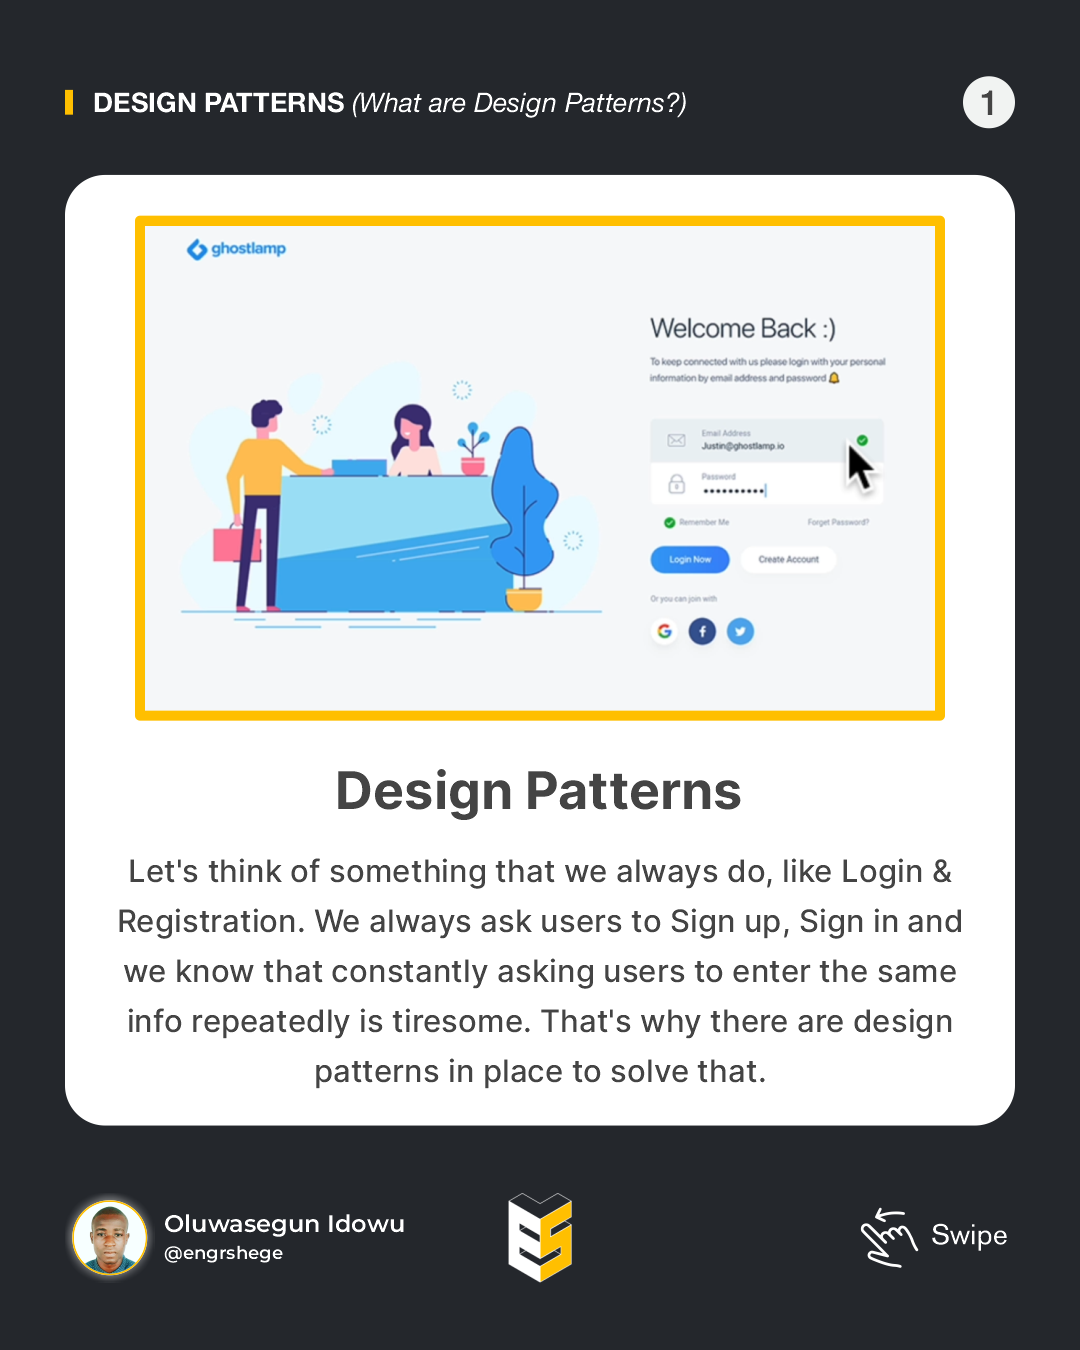 What are Design Patterns?